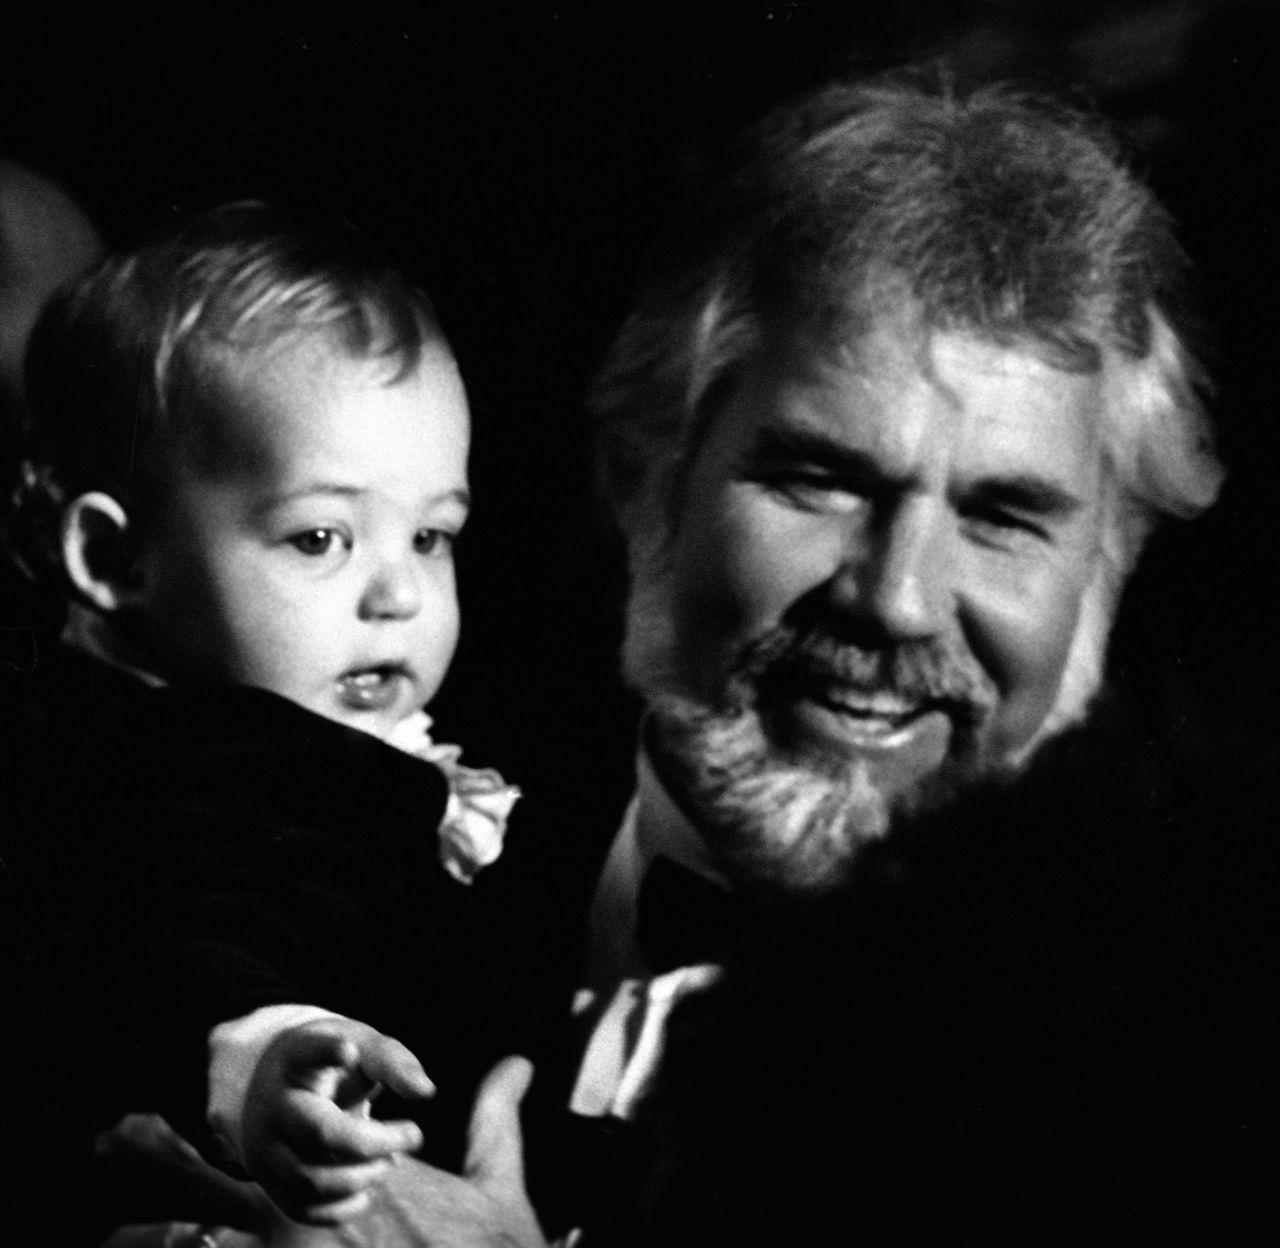 Rogers and son Christopher Cody Rogers attend the American Music Awards in 1983.